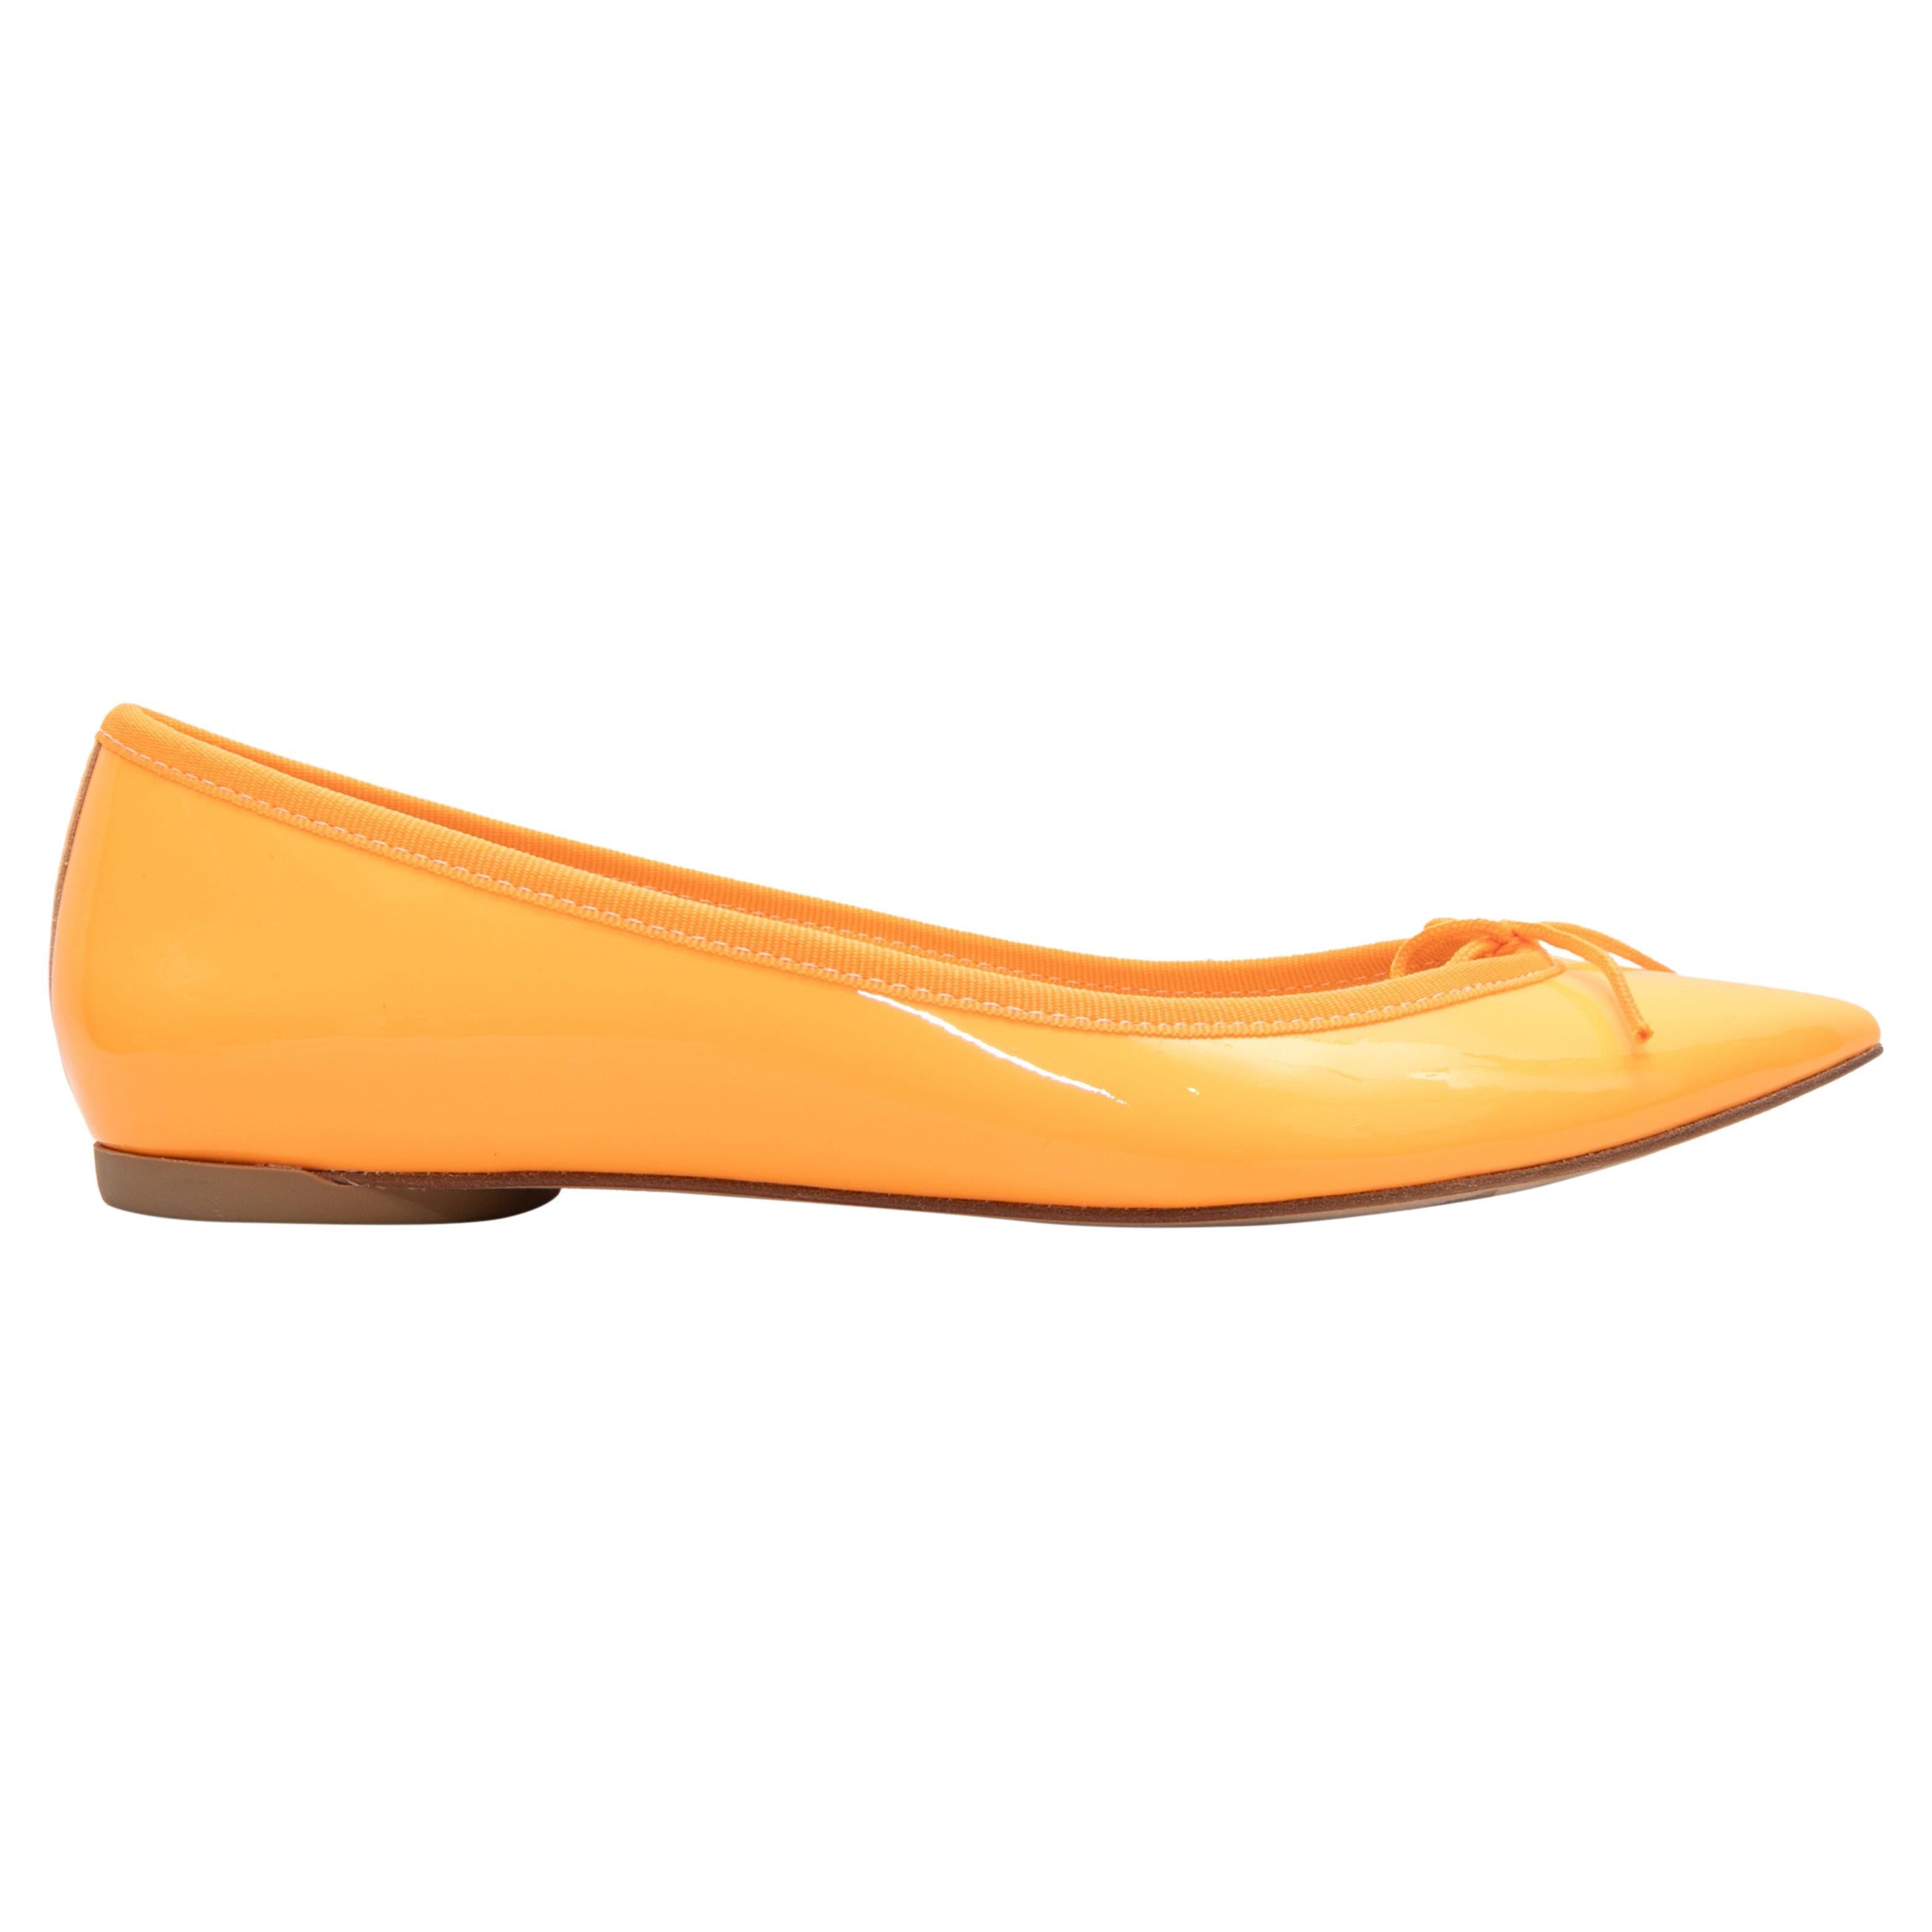 Marigold Repetto Patent Pointed-Toe Flats Size 41 For Sale